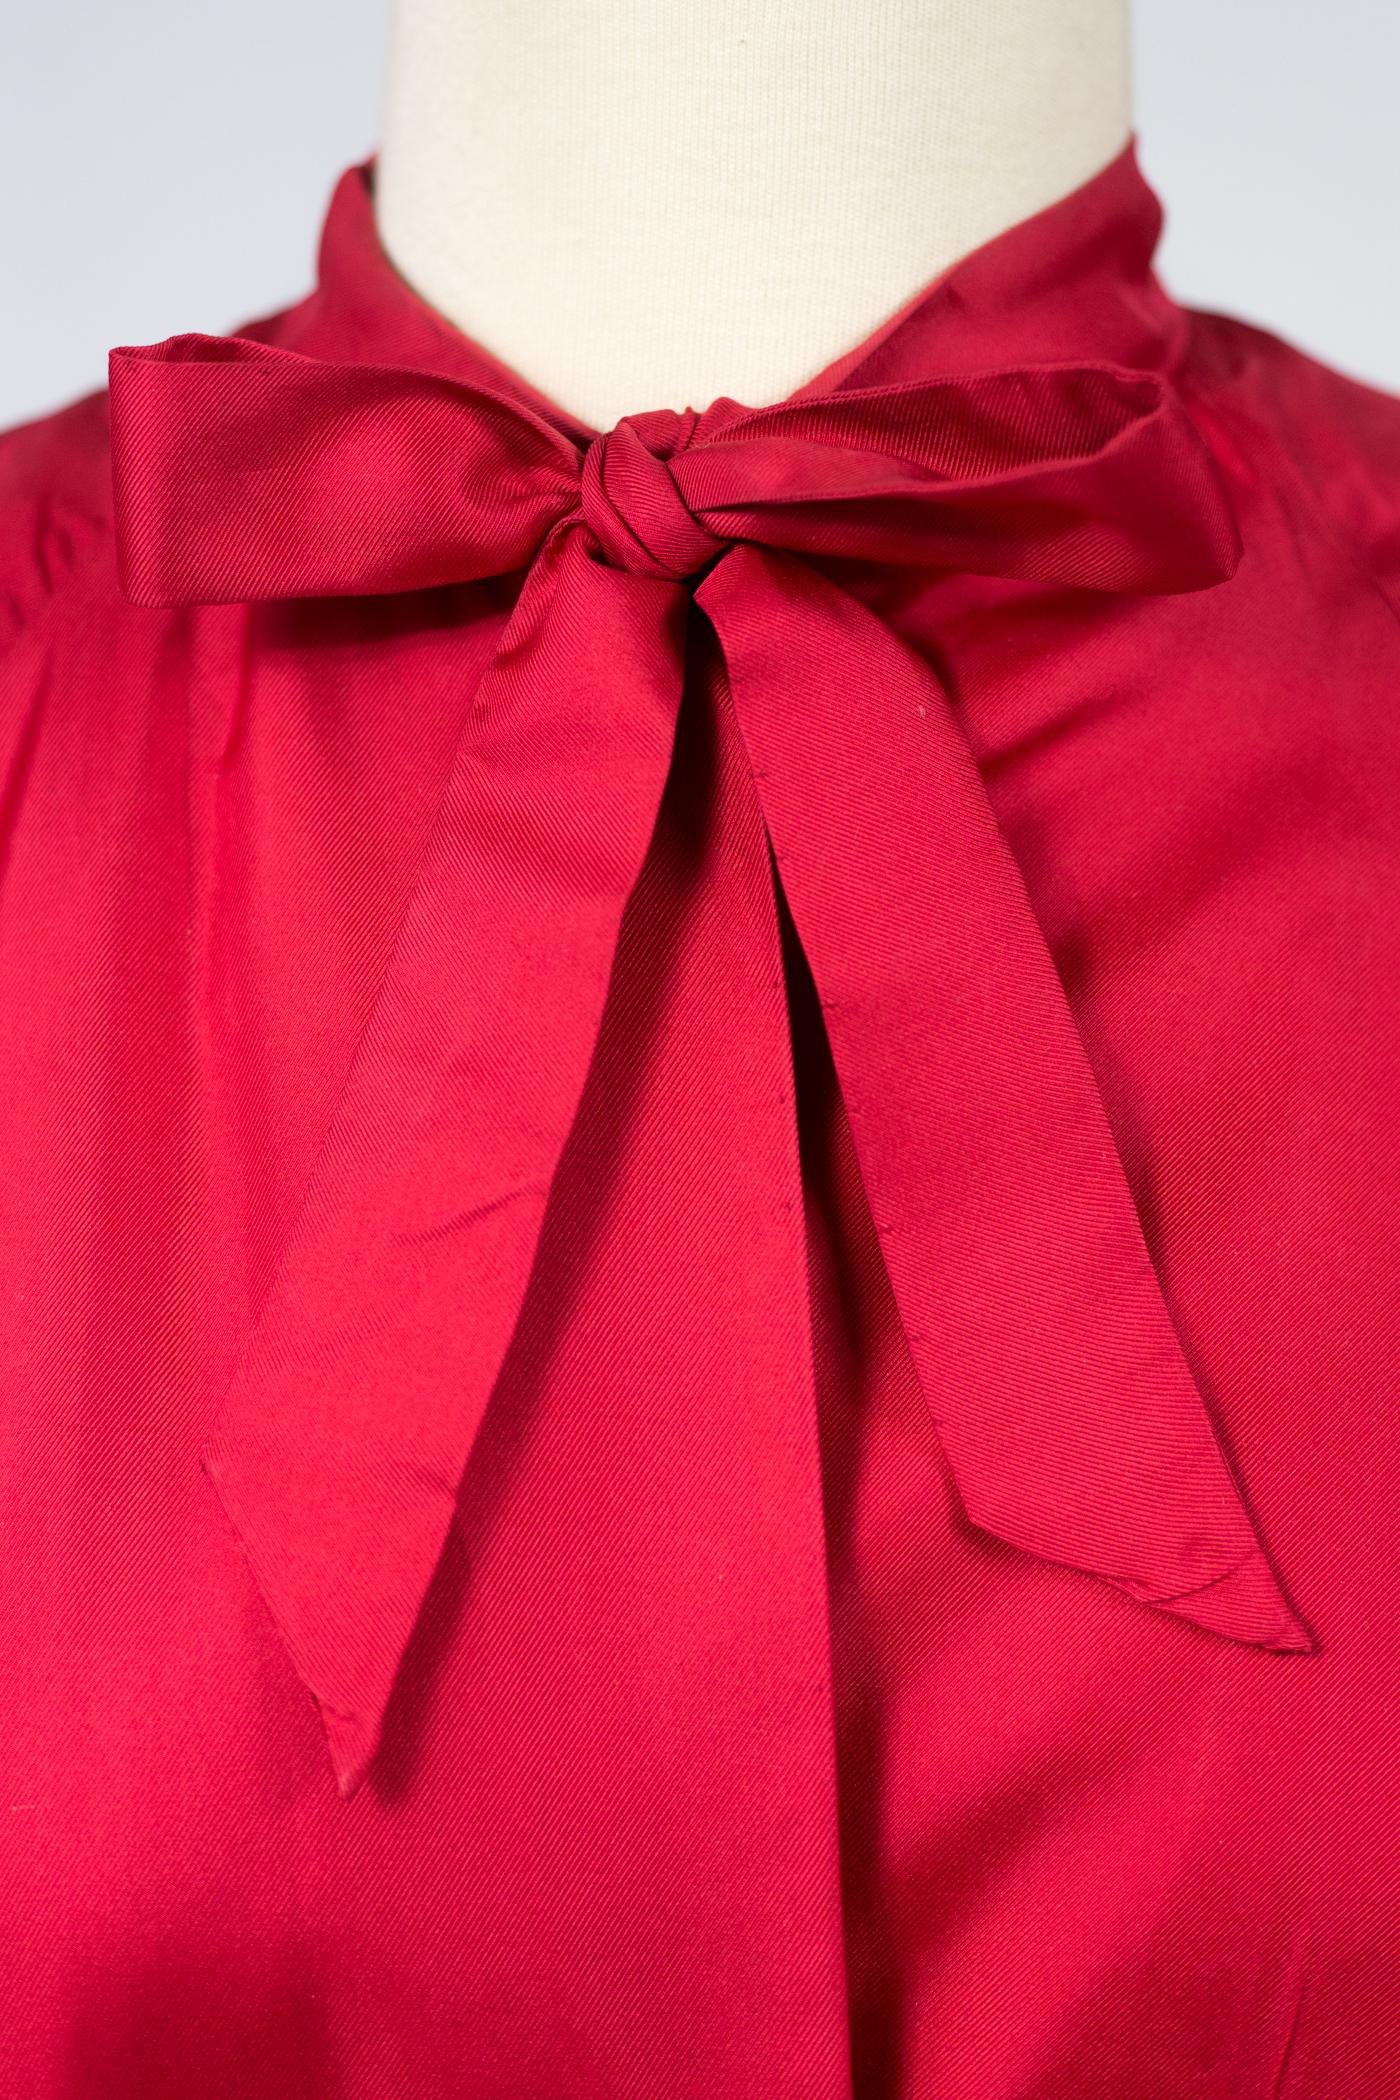 An Evening Maggy Rouff French Haute Couture Red Silk Coat Circa 1955 1